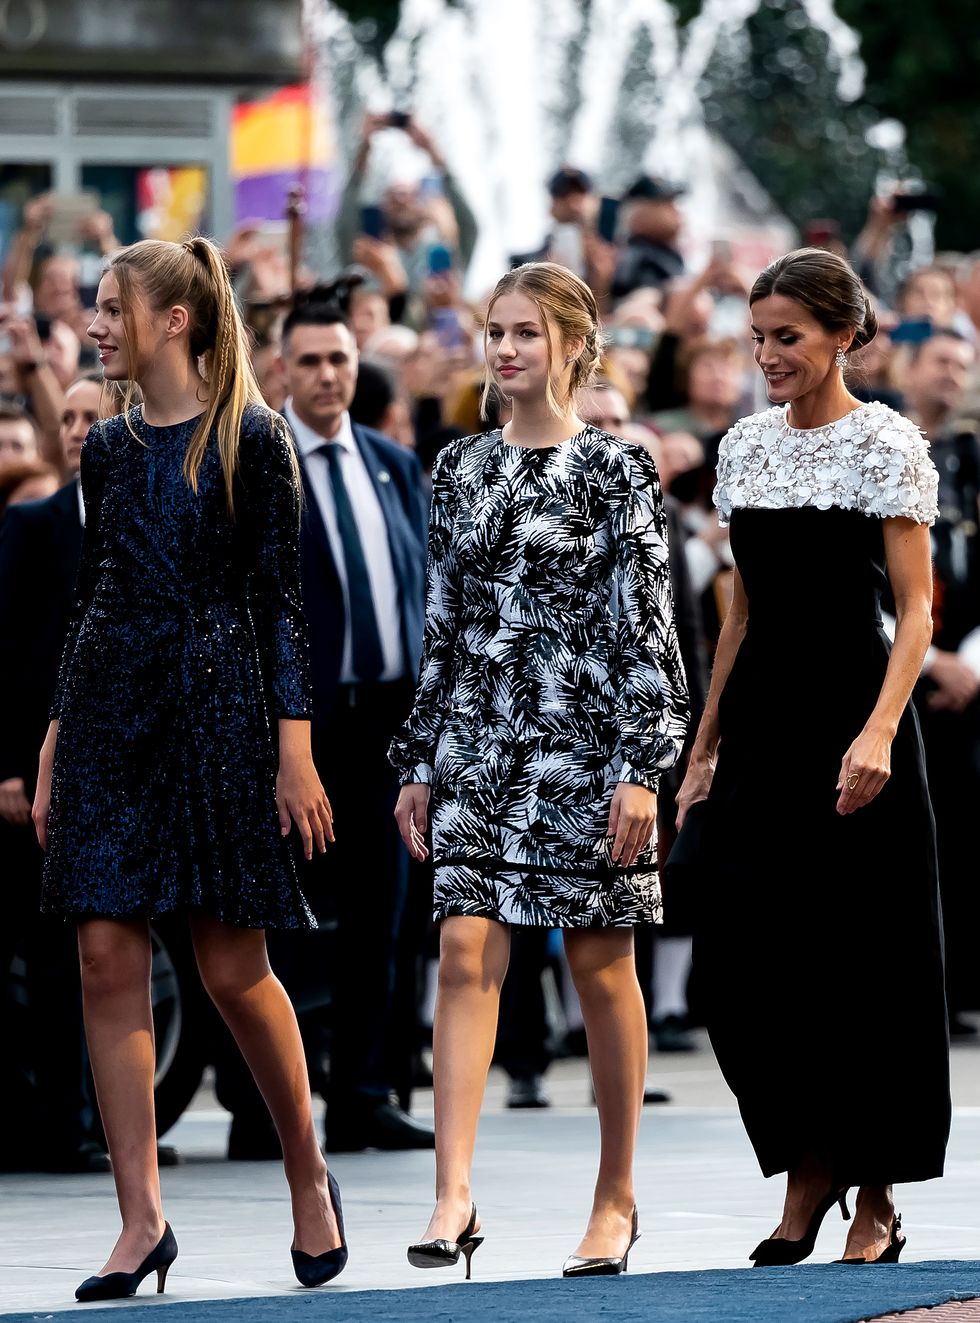 asturias, spain october 28 queen letizia of spain, crown princess leonor of spain and princess sofia of spain arrive at the princesa de asturias awards 2022 at teatro campoamor on october 28, 2022 in asturias, spain photo by samuel de romangetty images